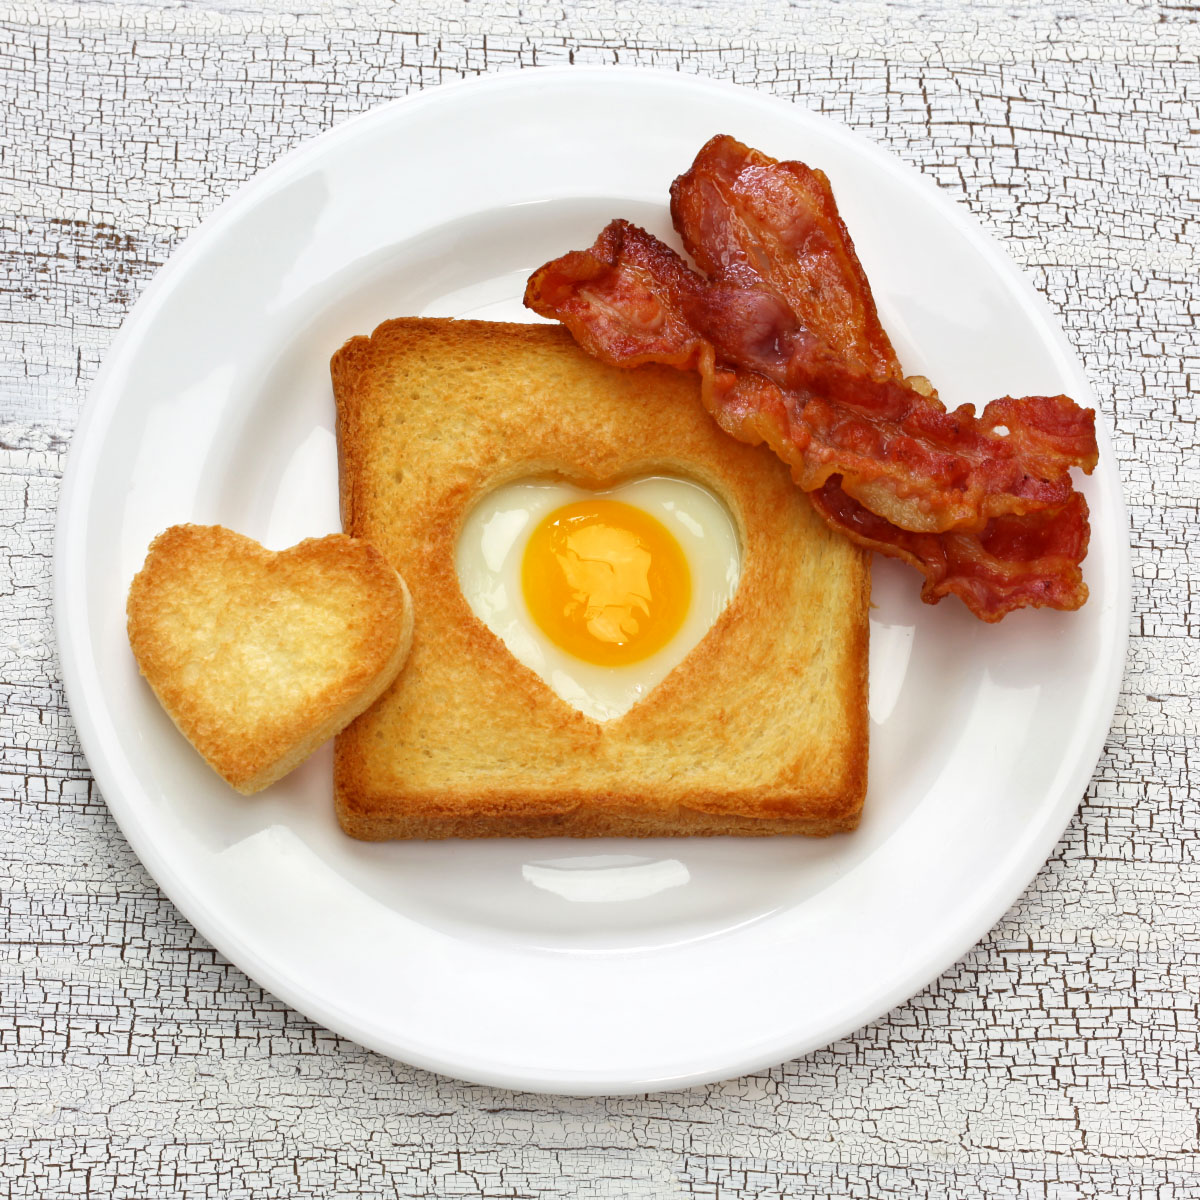 Egg in a hole or egg toast is a quick and easy breakfast made in an air fryer. You can enjoy this healthy, protein-packed breakfast if you're on a budget.